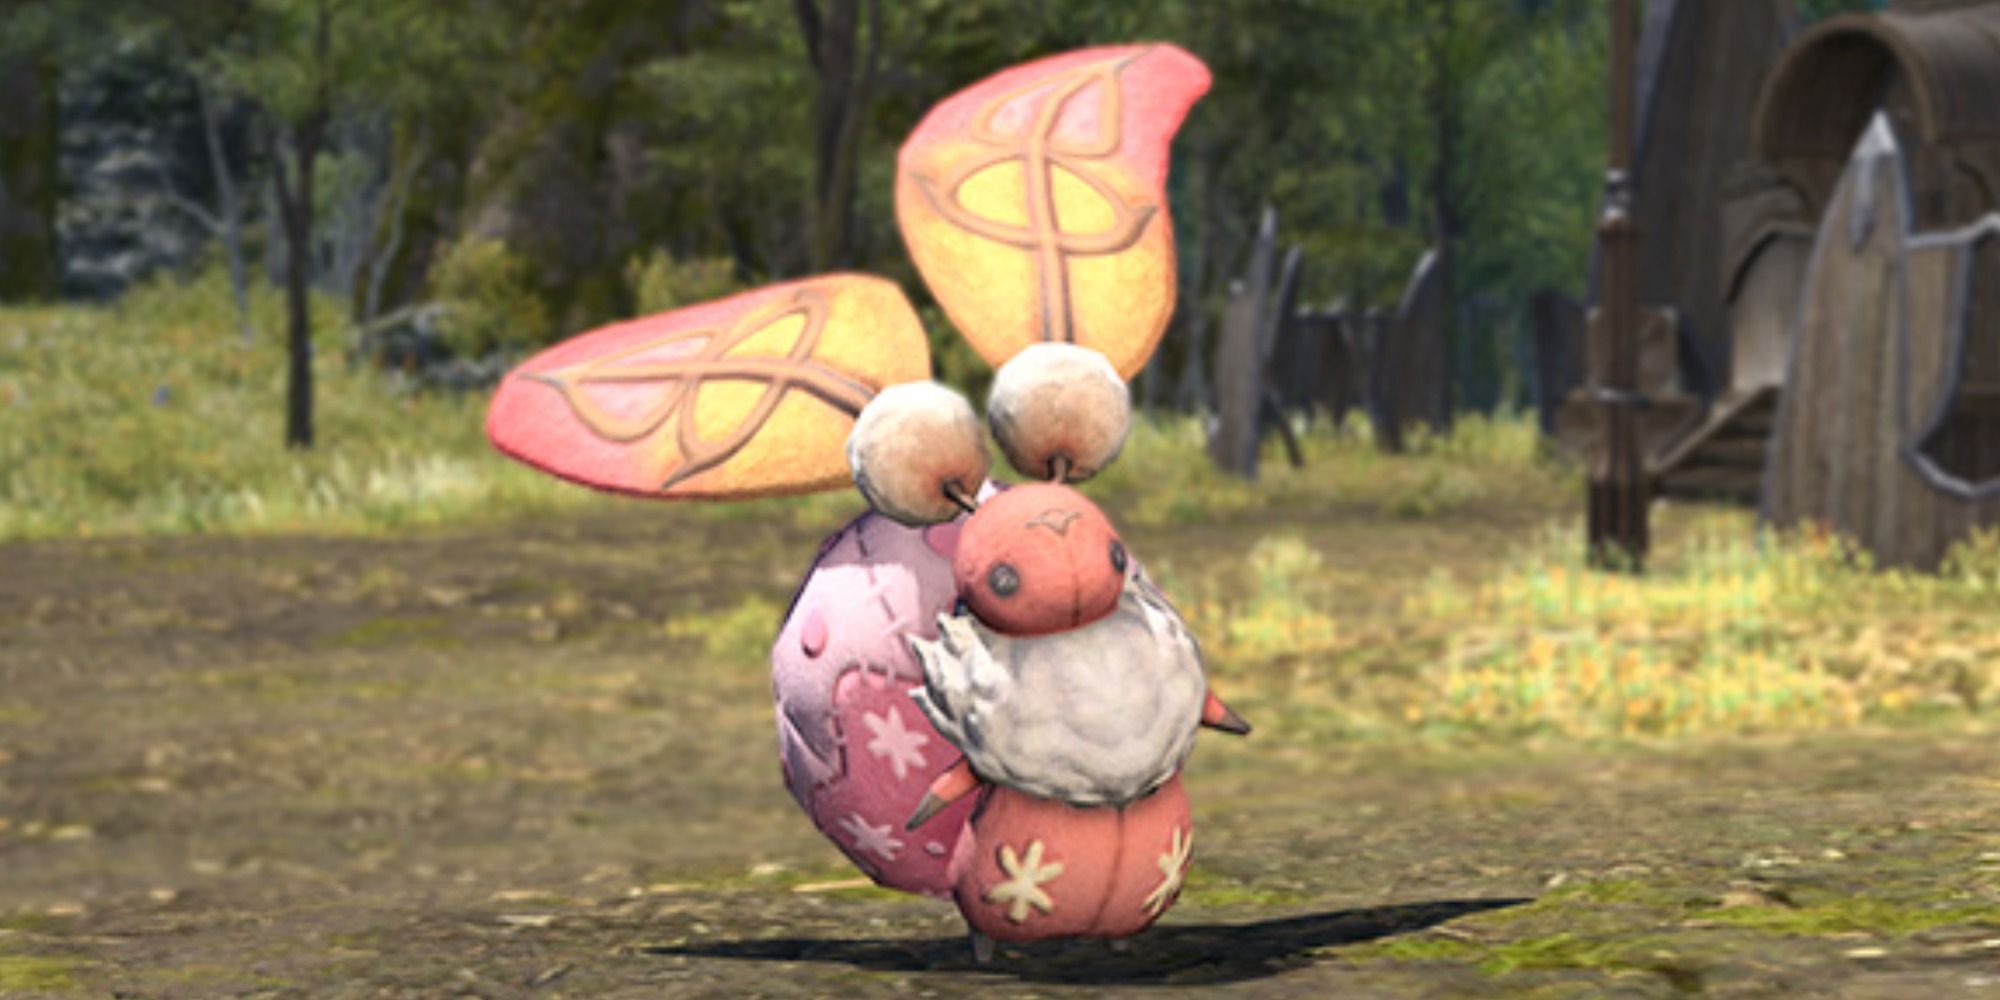 The Hatching Bunny Minion in Final Fantasy 14